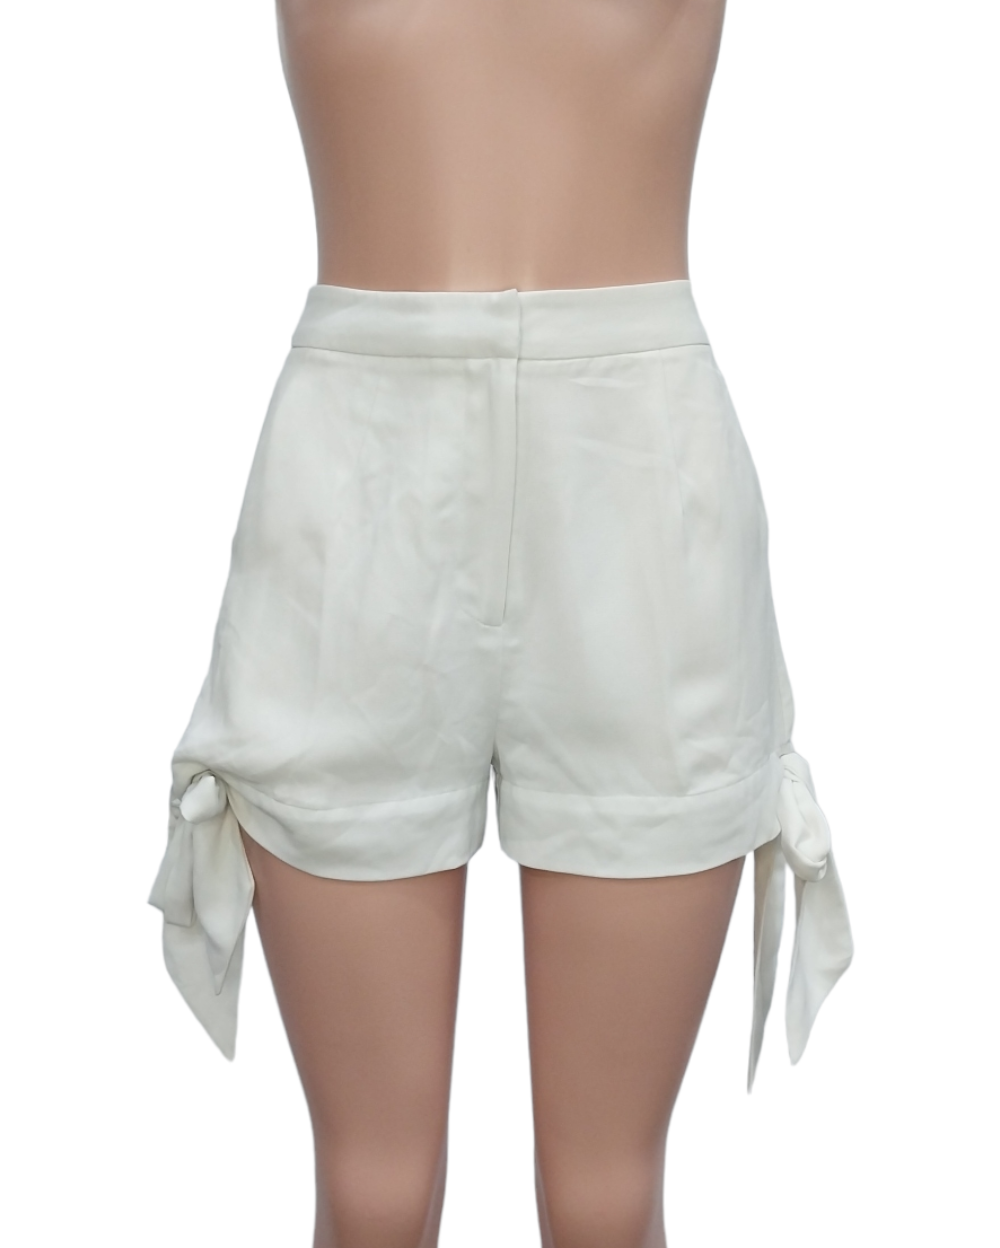 Shorts Casuales C/ meo collective